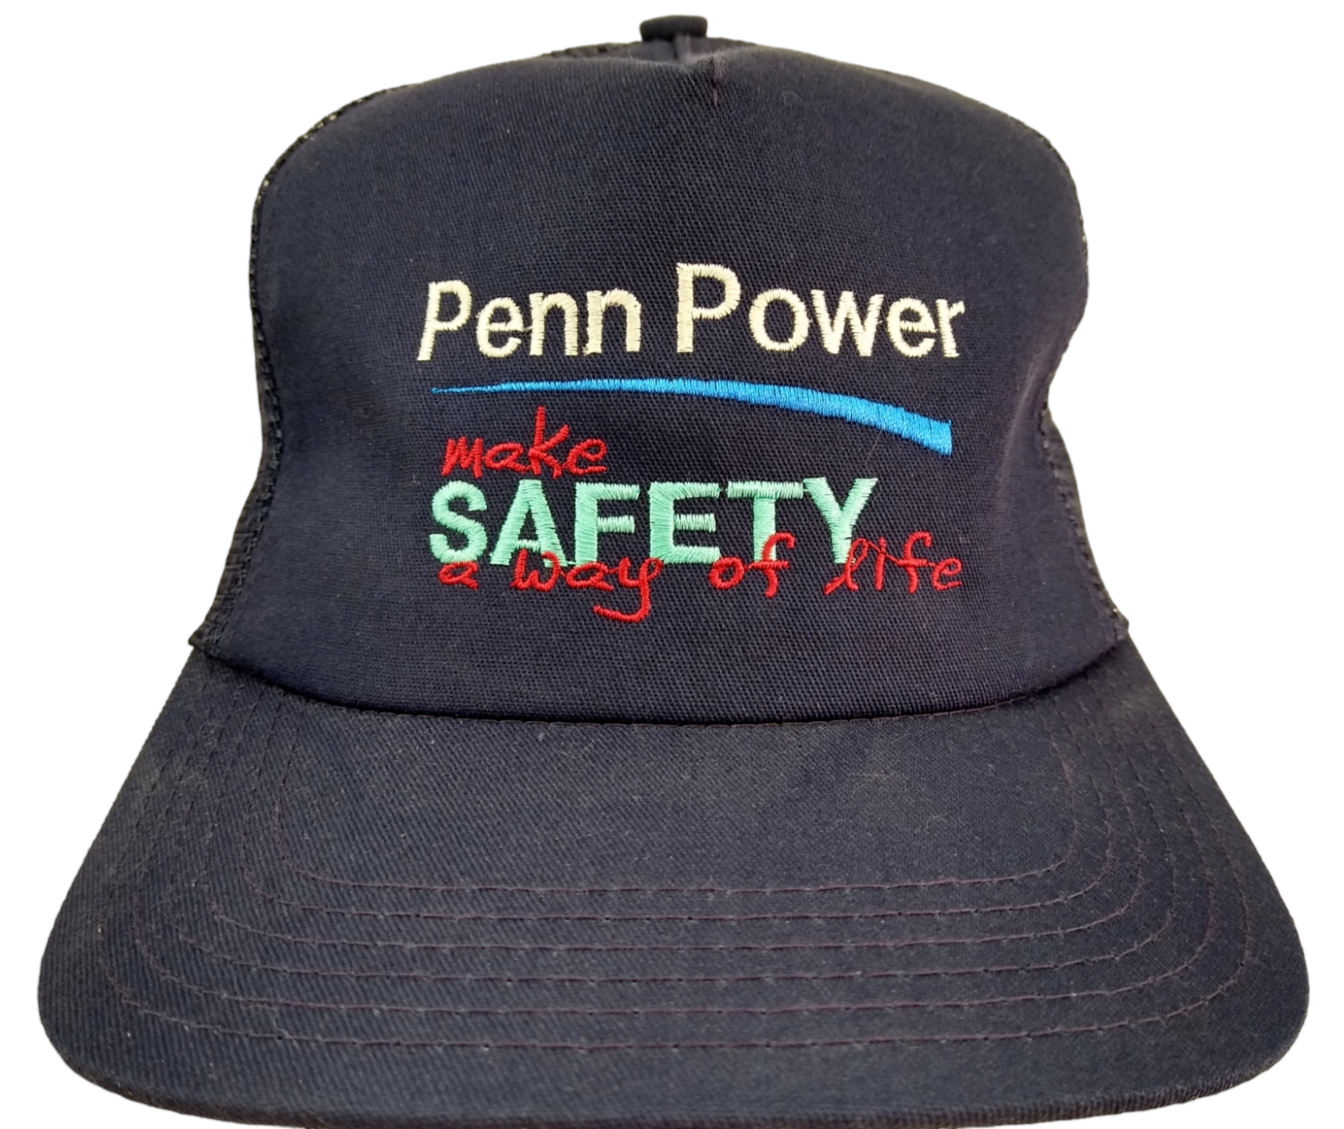 Primary image for Penn Power Safety Blue Snapback Mesh Trucker Hat Cap Made in USA